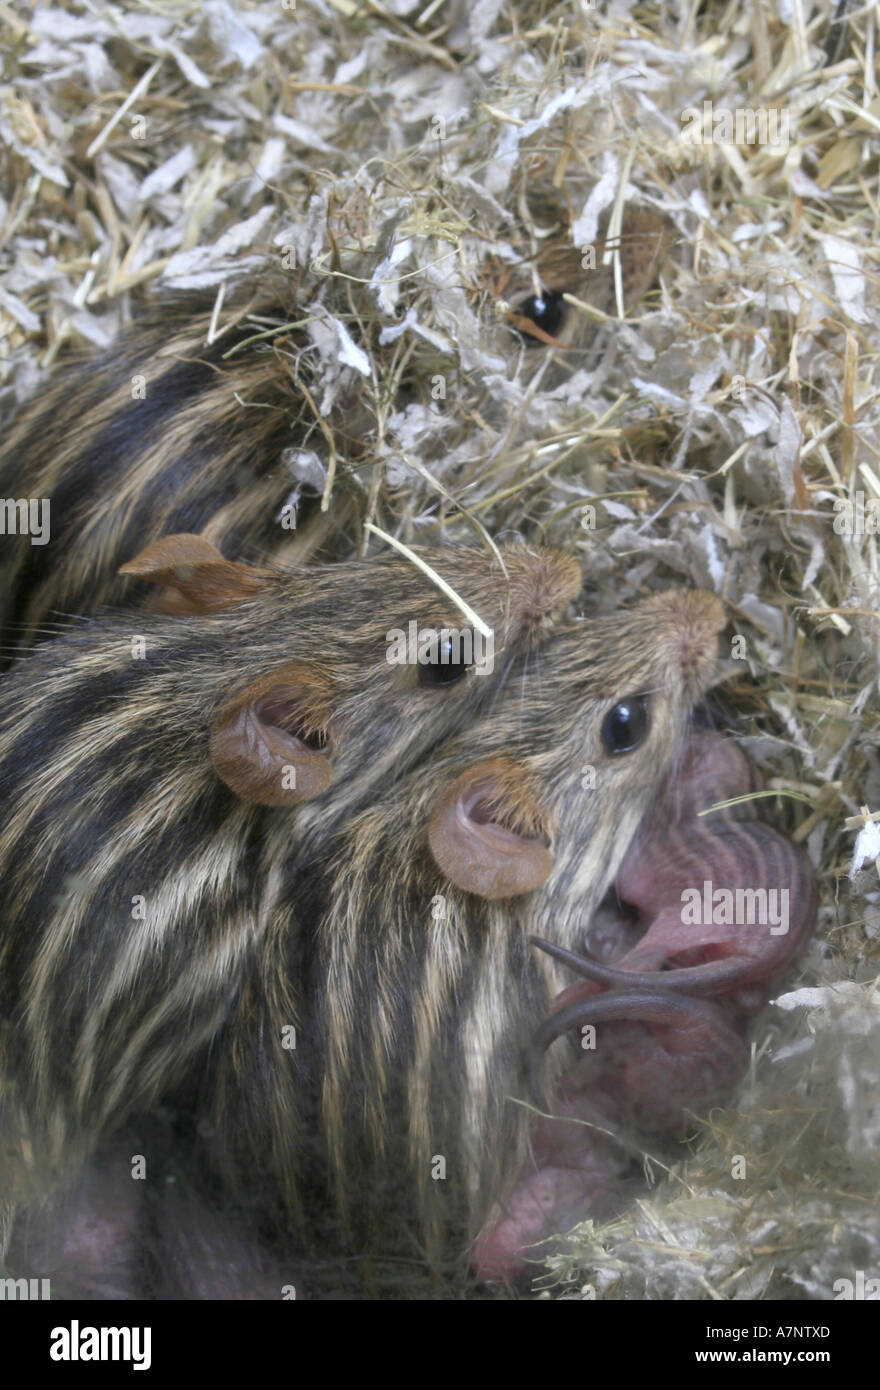 Stripped gras mouse (Lemniscomys barbarus), young animals Stock Photo